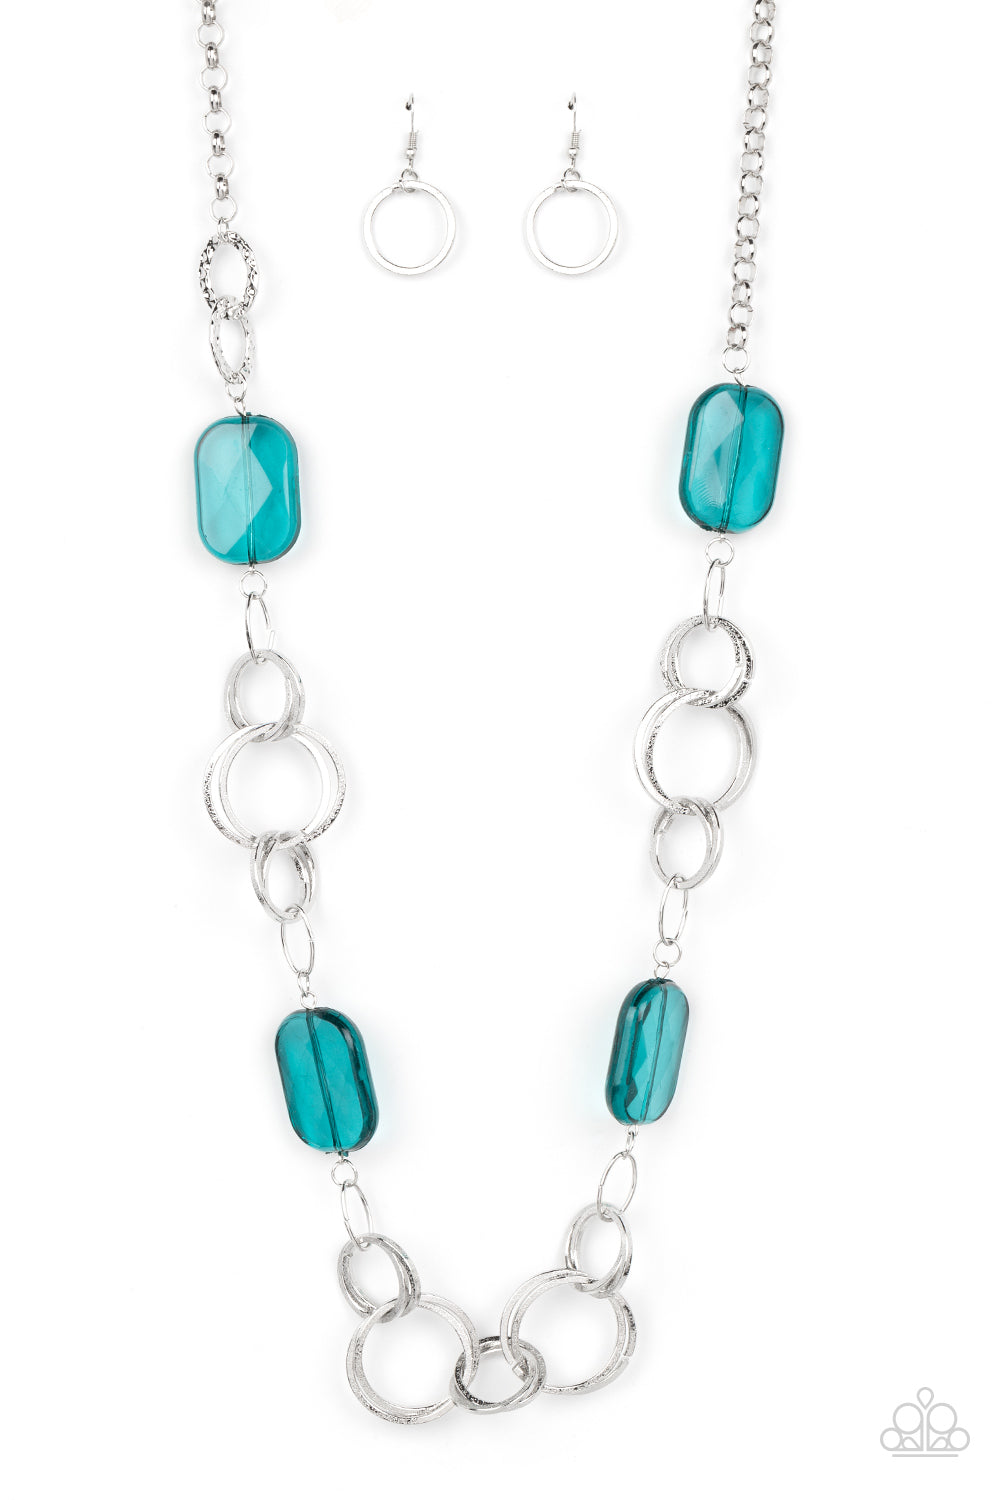 Stained Glass Glamour - Blue Oversize Bead/Hammered Silver Hoop Paparazzi Necklace & matching earrings